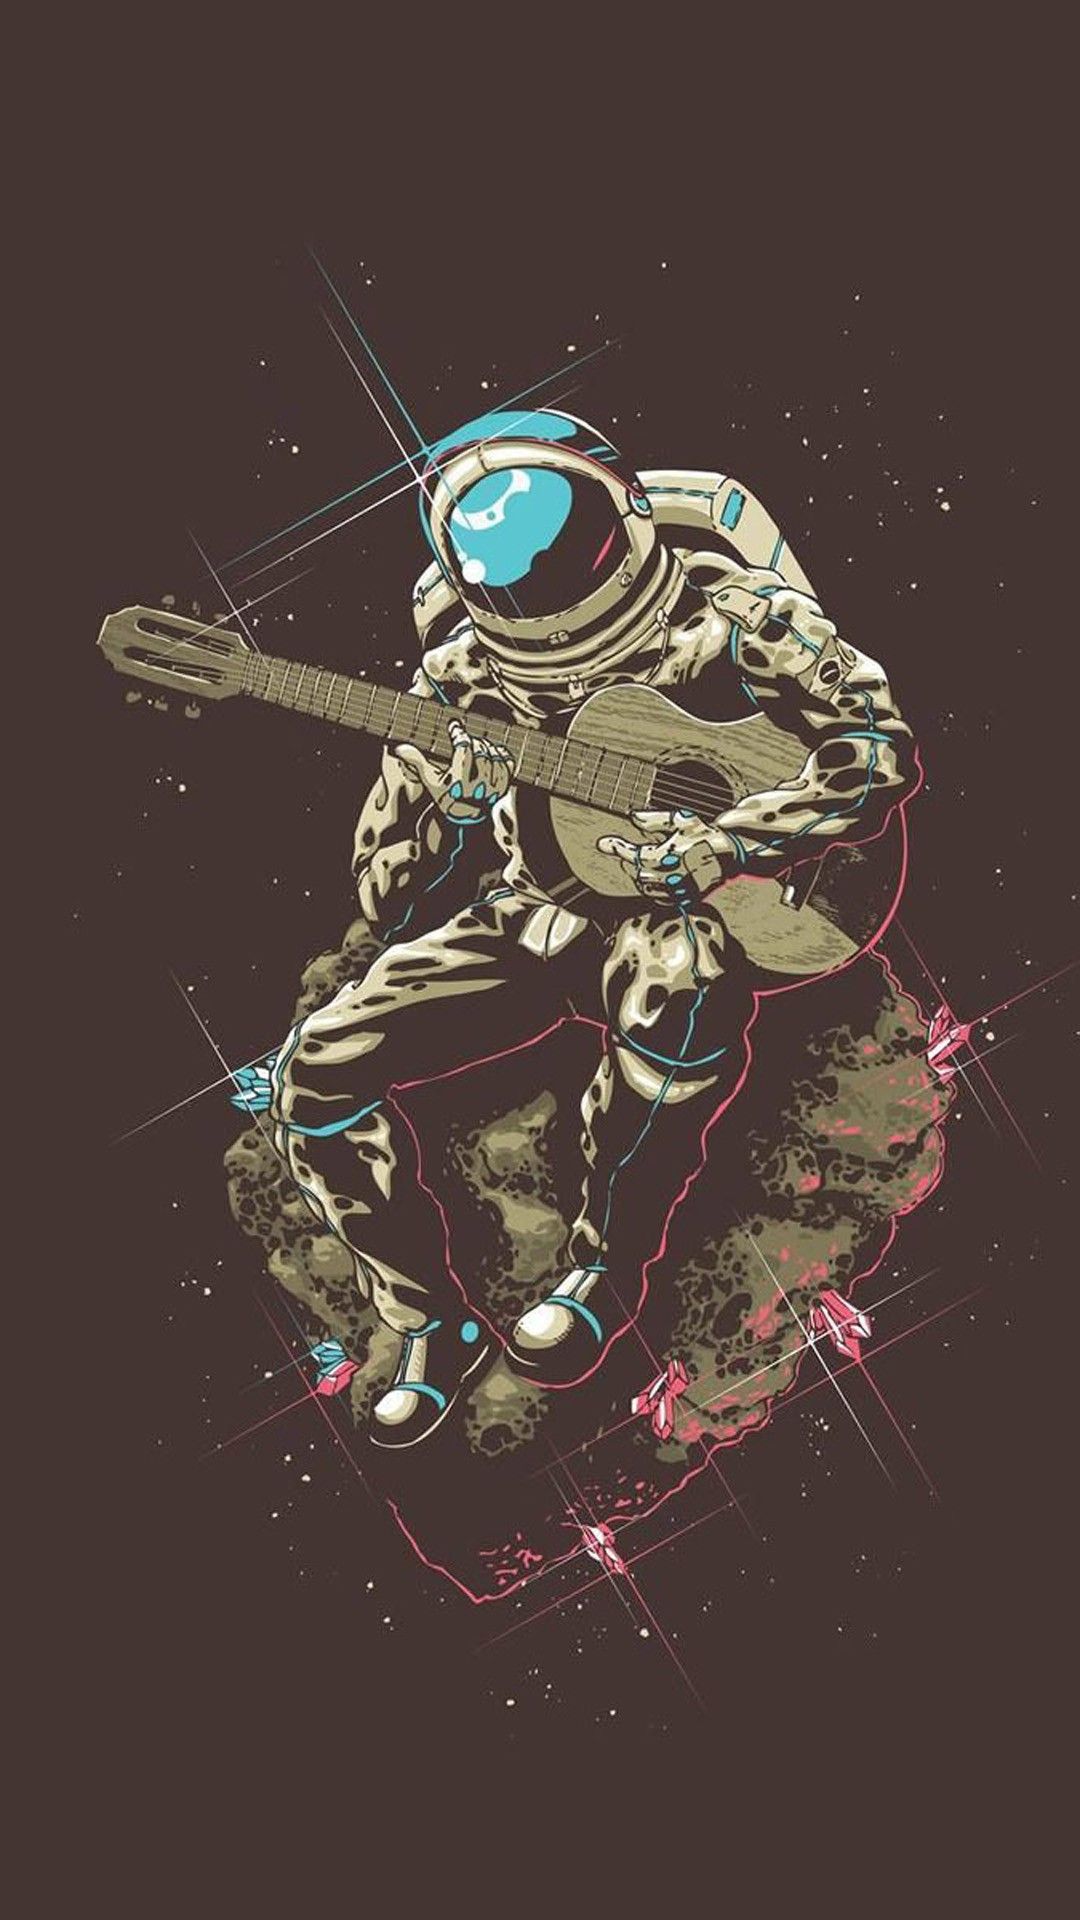 Hd astronaut iphone wallpapers